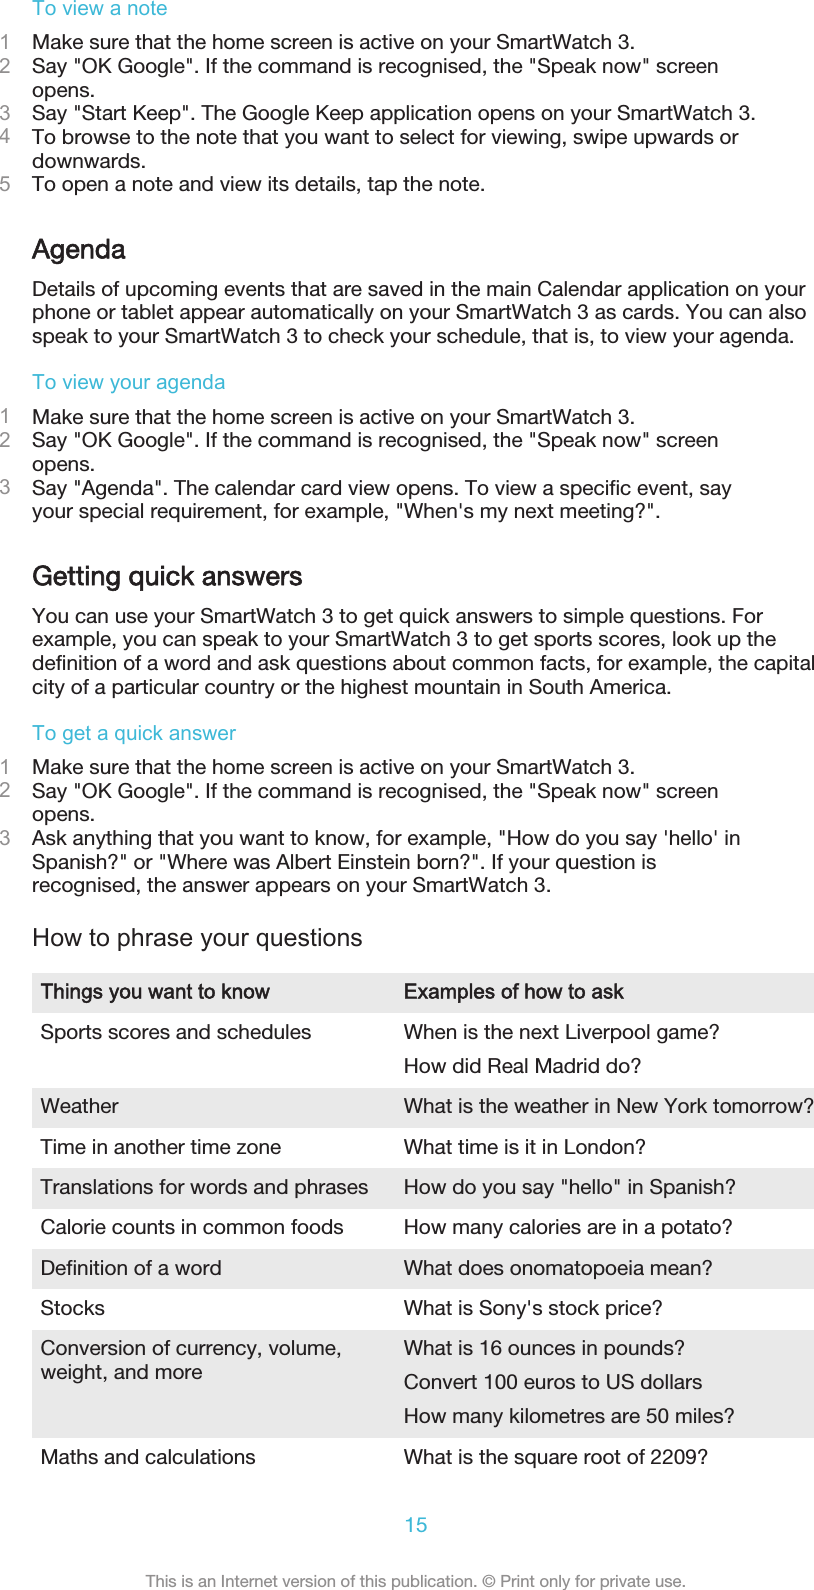 To view a note1Make sure that the home screen is active on your SmartWatch 3.2Say &quot;OK Google&quot;. If the command is recognised, the &quot;Speak now&quot; screenopens.3Say &quot;Start Keep&quot;. The Google Keep application opens on your SmartWatch 3.4To browse to the note that you want to select for viewing, swipe upwards ordownwards.5To open a note and view its details, tap the note.AgendaDetails of upcoming events that are saved in the main Calendar application on yourphone or tablet appear automatically on your SmartWatch 3 as cards. You can alsospeak to your SmartWatch 3 to check your schedule, that is, to view your agenda.To view your agenda1Make sure that the home screen is active on your SmartWatch 3.2Say &quot;OK Google&quot;. If the command is recognised, the &quot;Speak now&quot; screenopens.3Say &quot;Agenda&quot;. The calendar card view opens. To view a specific event, sayyour special requirement, for example, &quot;When&apos;s my next meeting?&quot;.Getting quick answersYou can use your SmartWatch 3 to get quick answers to simple questions. Forexample, you can speak to your SmartWatch 3 to get sports scores, look up thedefinition of a word and ask questions about common facts, for example, the capitalcity of a particular country or the highest mountain in South America.To get a quick answer1Make sure that the home screen is active on your SmartWatch 3.2Say &quot;OK Google&quot;. If the command is recognised, the &quot;Speak now&quot; screenopens.3Ask anything that you want to know, for example, &quot;How do you say &apos;hello&apos; inSpanish?&quot; or &quot;Where was Albert Einstein born?&quot;. If your question isrecognised, the answer appears on your SmartWatch 3.How to phrase your questionsThings you want to know Examples of how to askSports scores and schedules When is the next Liverpool game?How did Real Madrid do?Weather What is the weather in New York tomorrow?Time in another time zone What time is it in London?Translations for words and phrases How do you say &quot;hello&quot; in Spanish?Calorie counts in common foods How many calories are in a potato?Definition of a word What does onomatopoeia mean?Stocks What is Sony&apos;s stock price?Conversion of currency, volume,weight, and more What is 16 ounces in pounds?Convert 100 euros to US dollarsHow many kilometres are 50 miles?Maths and calculations What is the square root of 2209?15This is an Internet version of this publication. © Print only for private use.